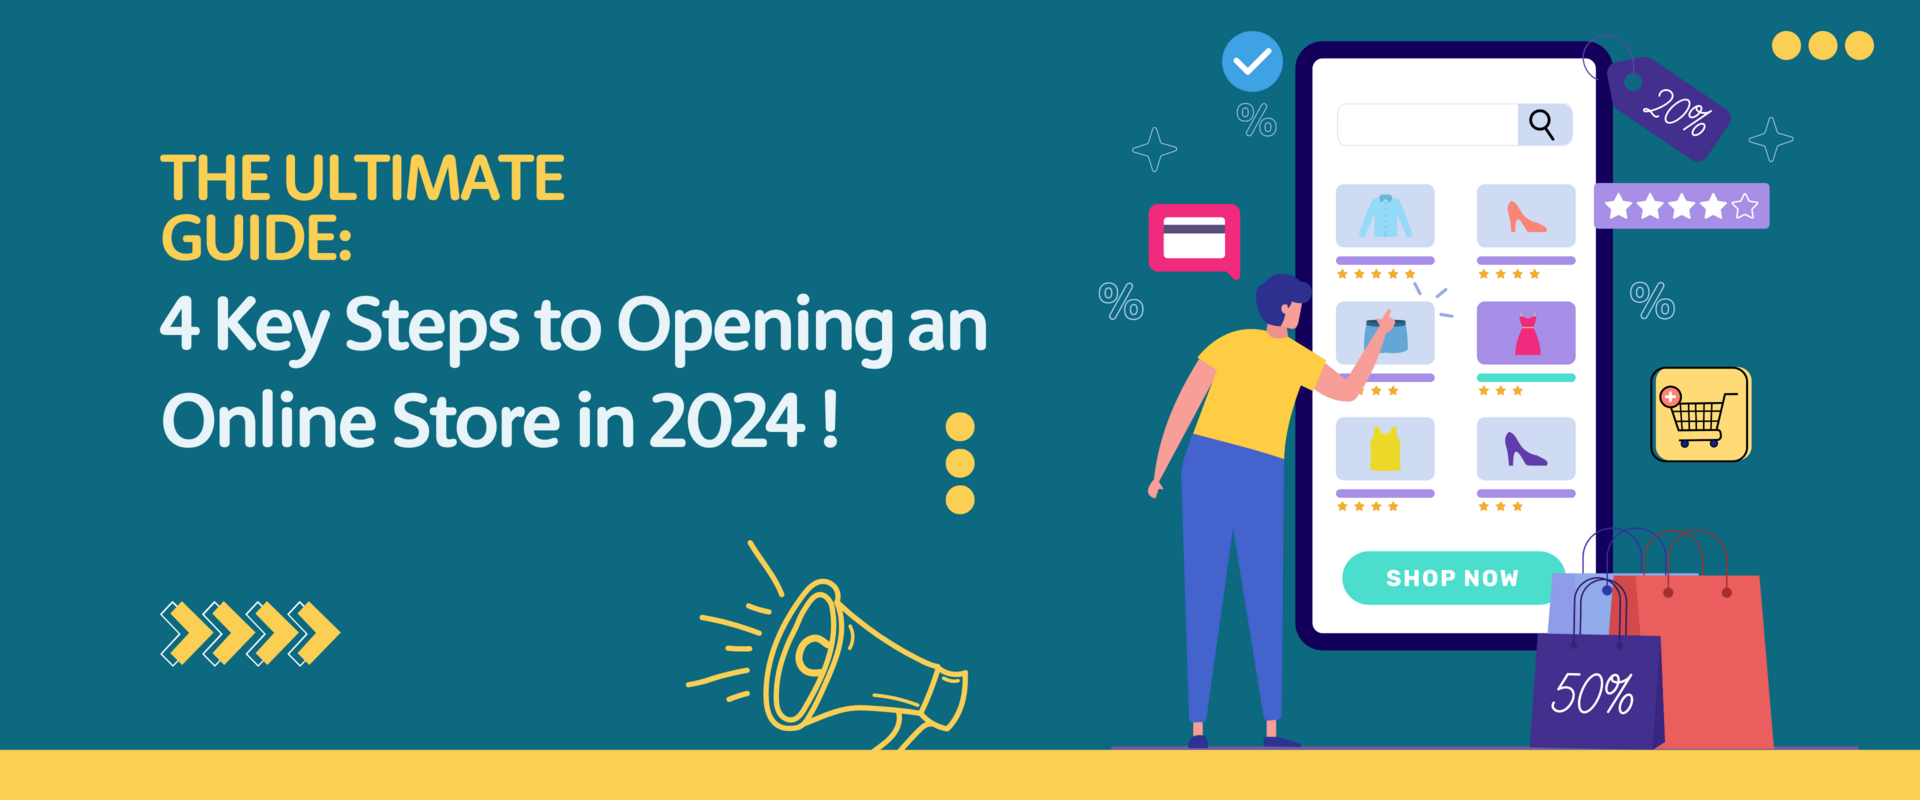 The Ultimate Guide: 4 Key Steps to Opening an Online Store in 2024 !